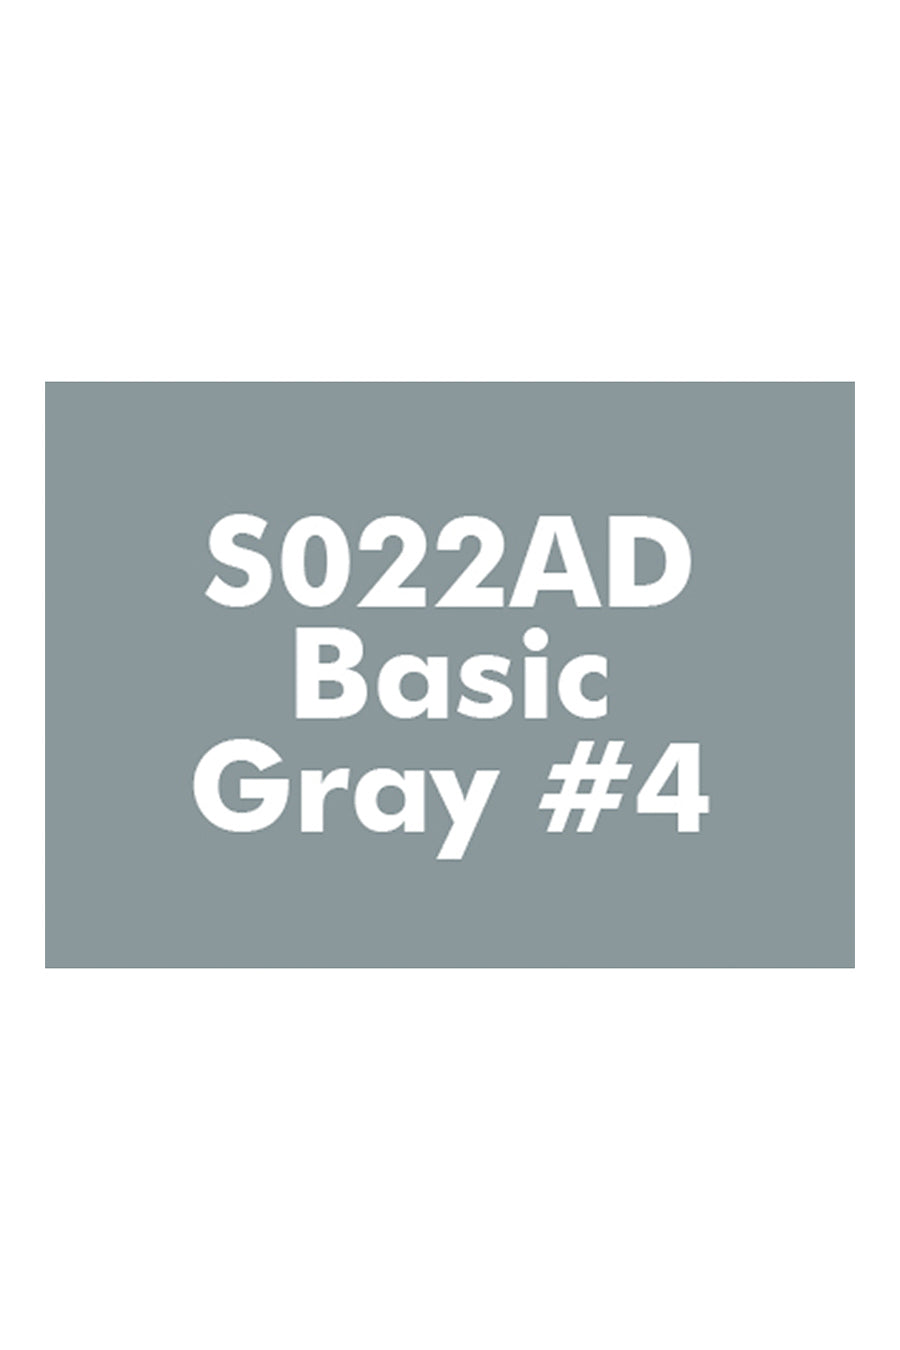 SPECTRA AD COOL GRAY 30%